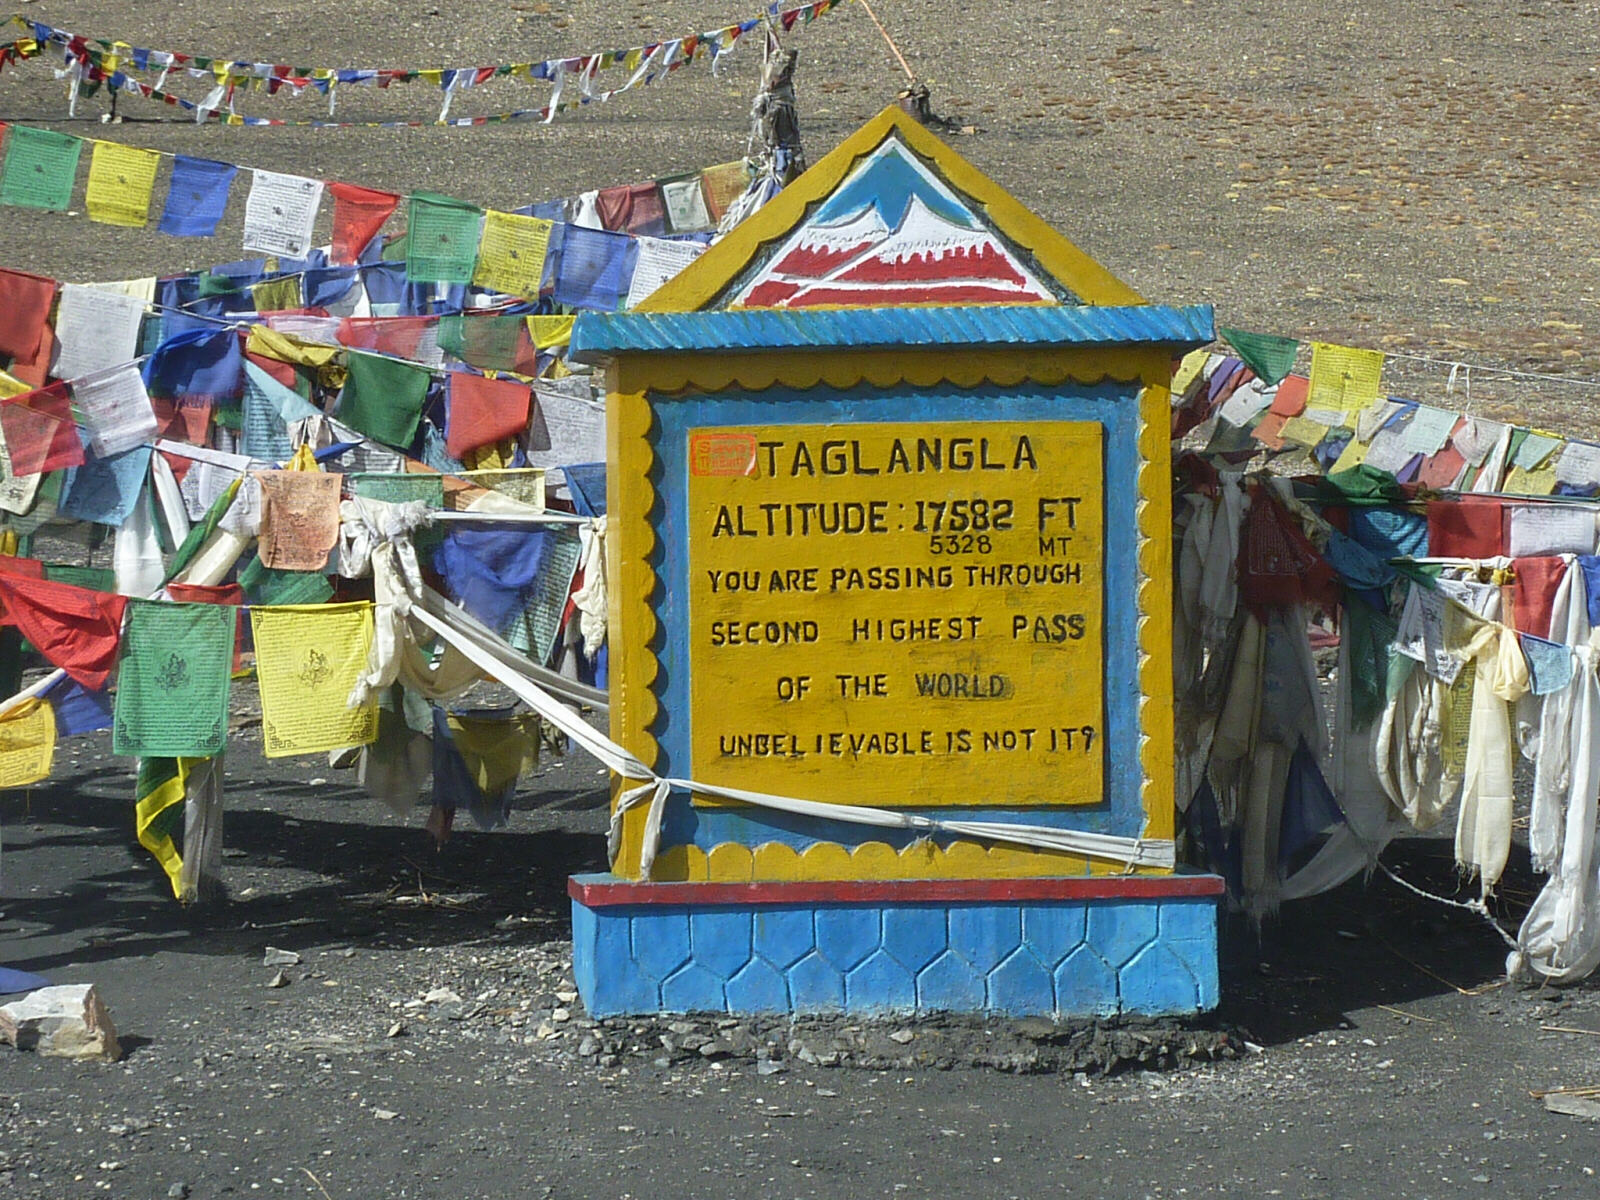 Taglang-La, second highest pass in the world, Ladakh, India